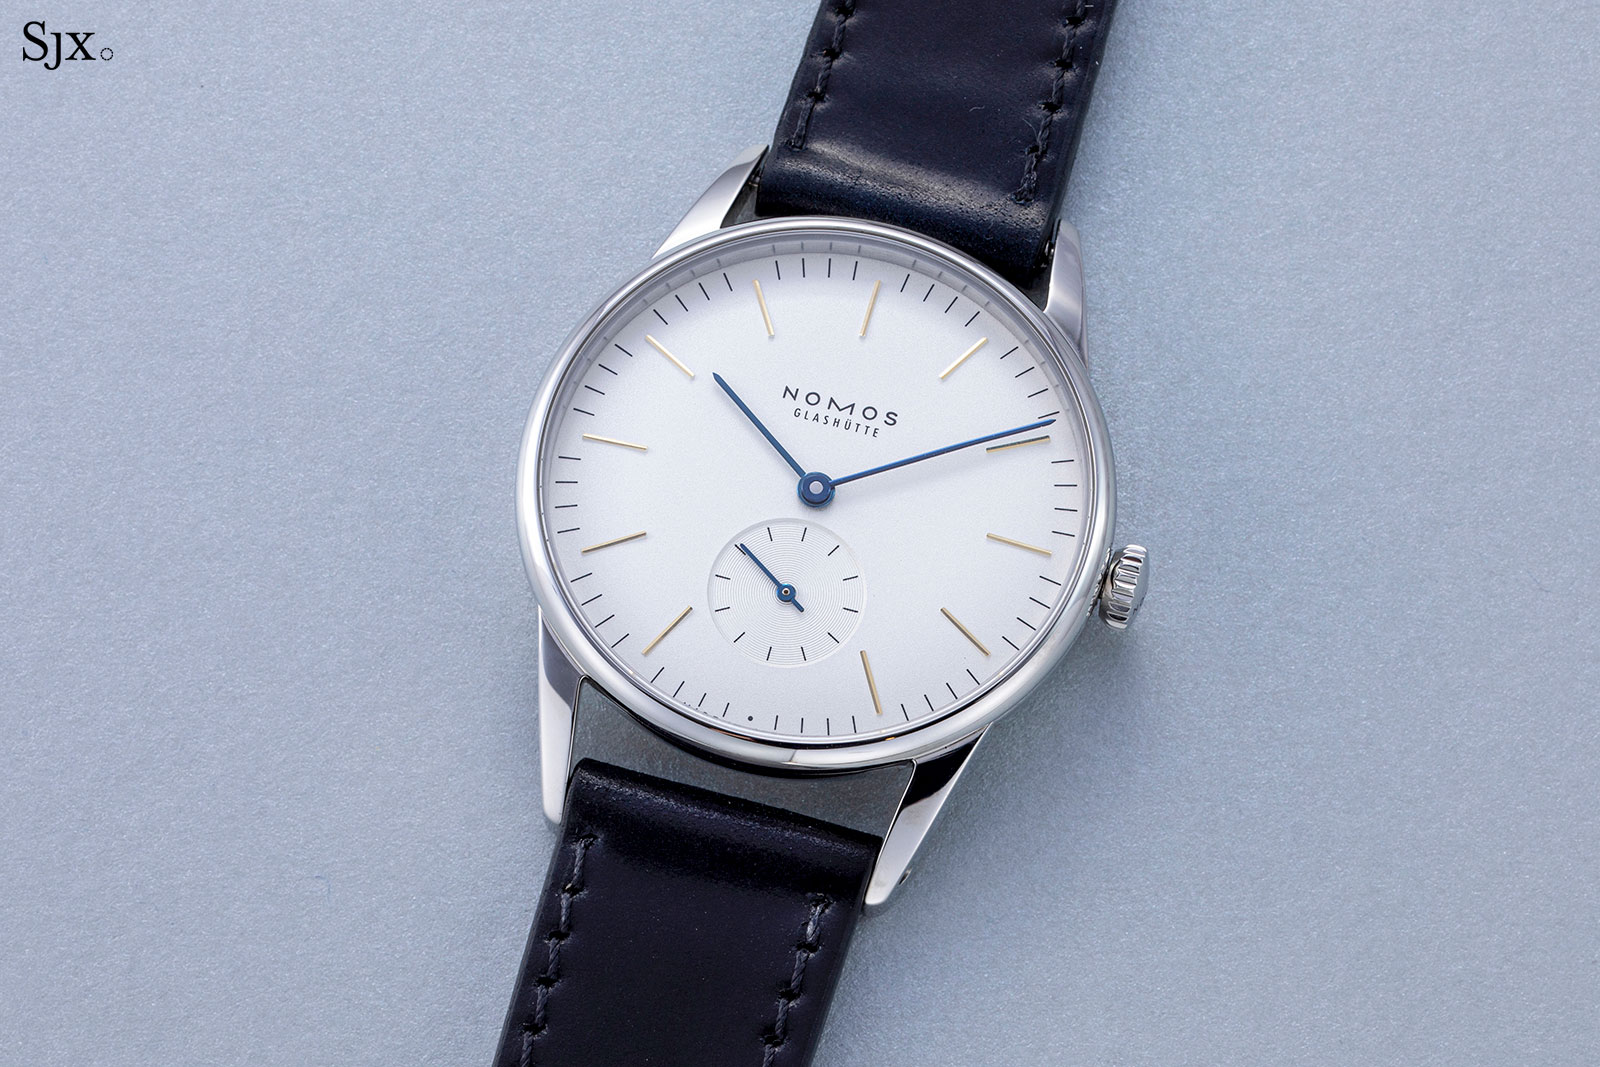 Up Close: Nomos Orion Hand-Wind | SJX Watches